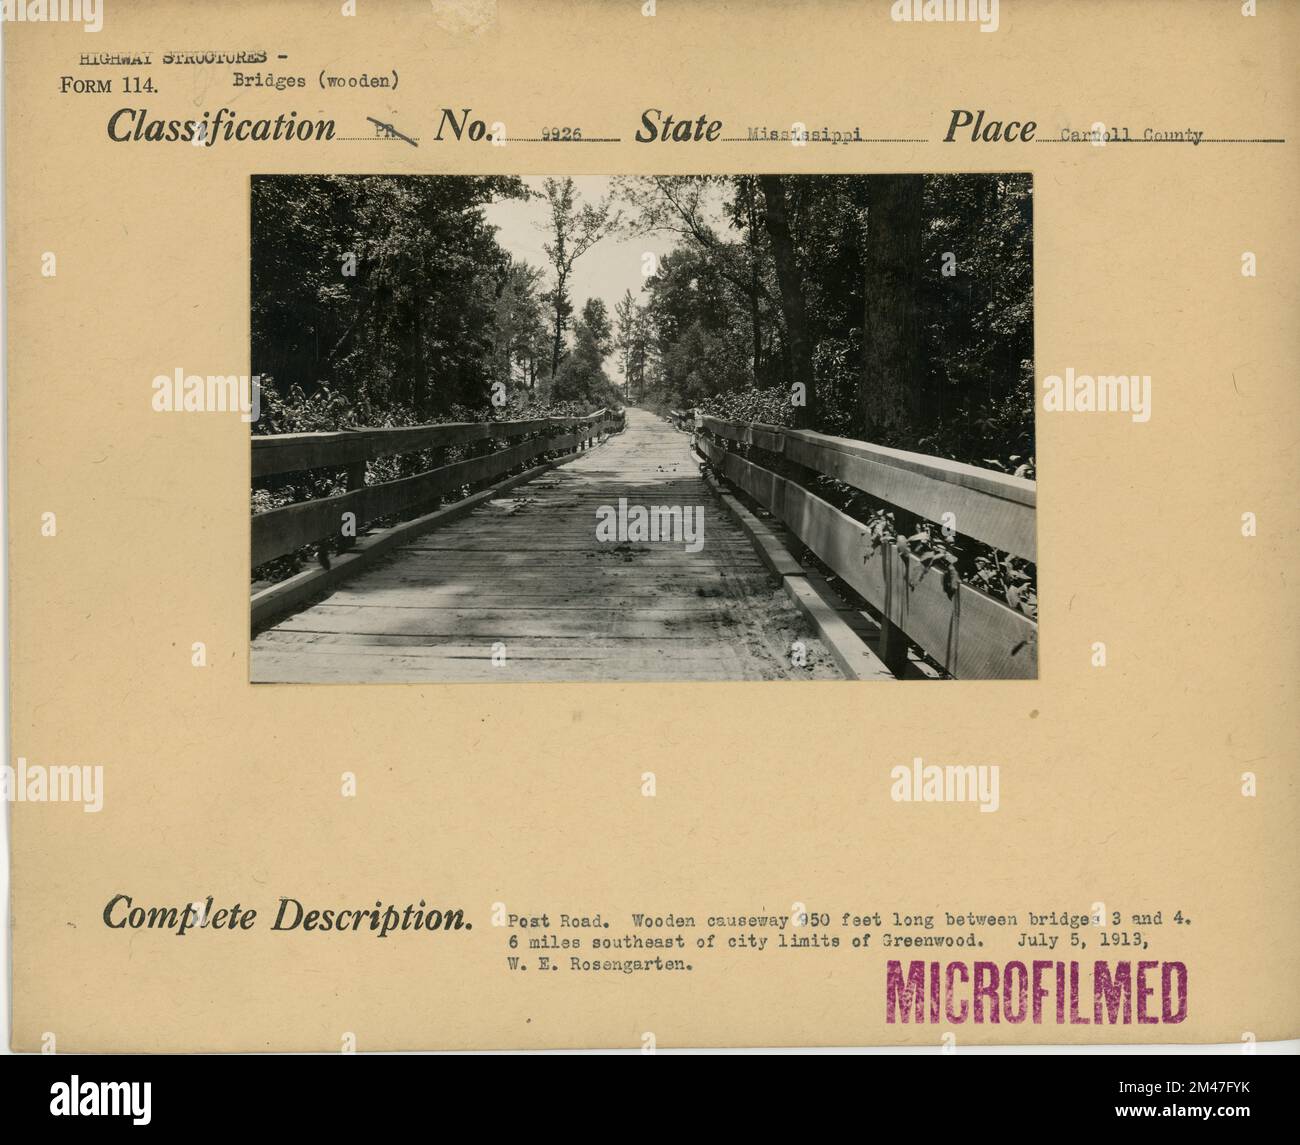 Post Road. Original caption: Wooden causeway 950 feet long between bridges 3 and 4. 6 miles southeast of city limits of Greenwood. W. E. Rosengarten. State: Mississippi. Place: Carroll County. Stock Photo